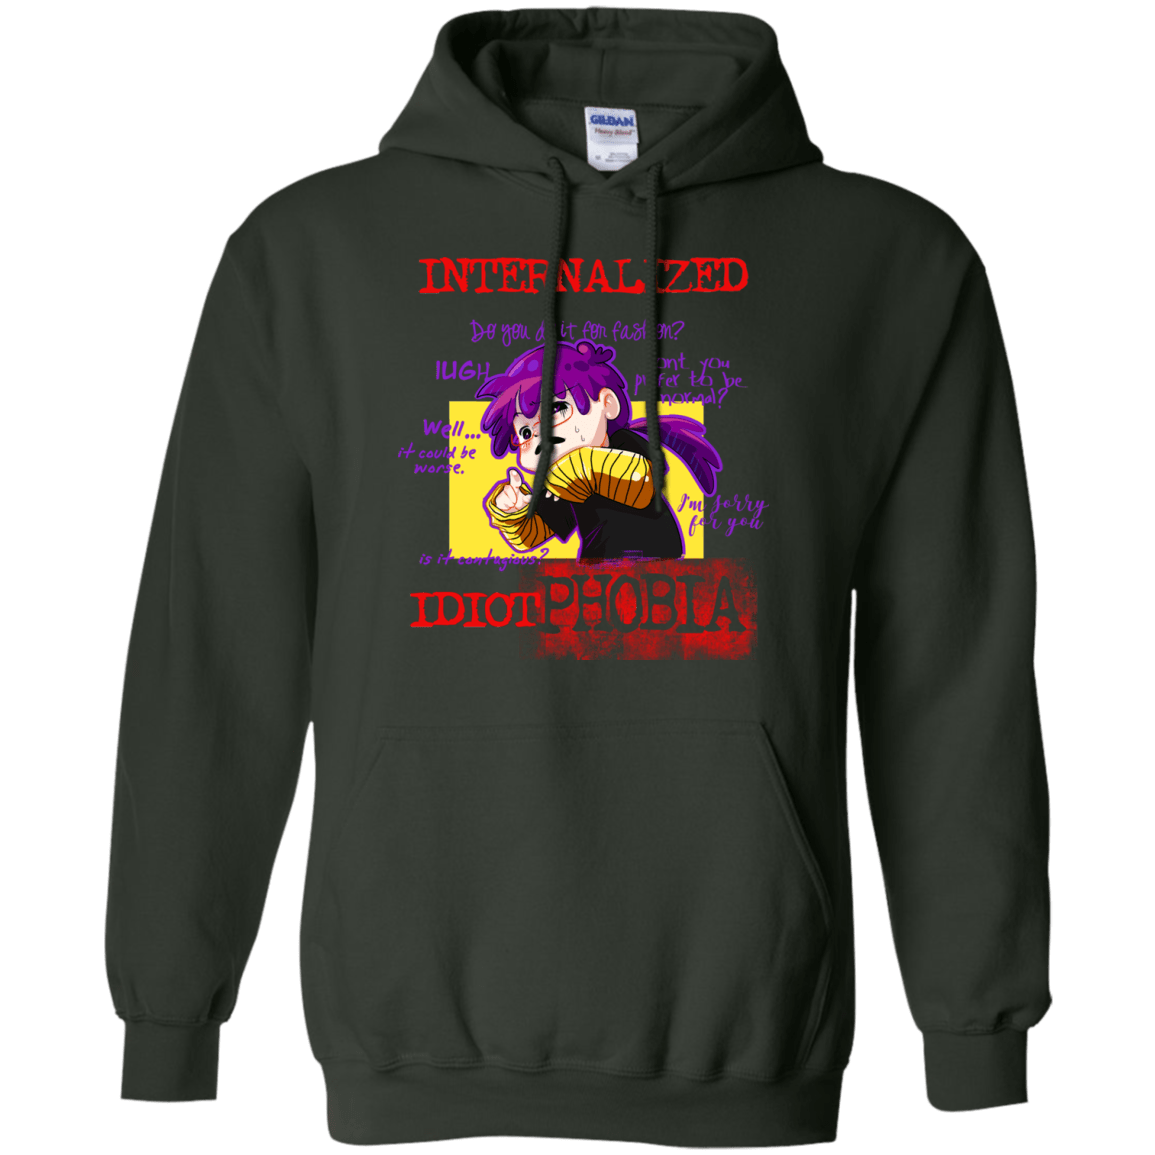 Sweatshirts Forest Green / Small Idiot phobia Pullover Hoodie